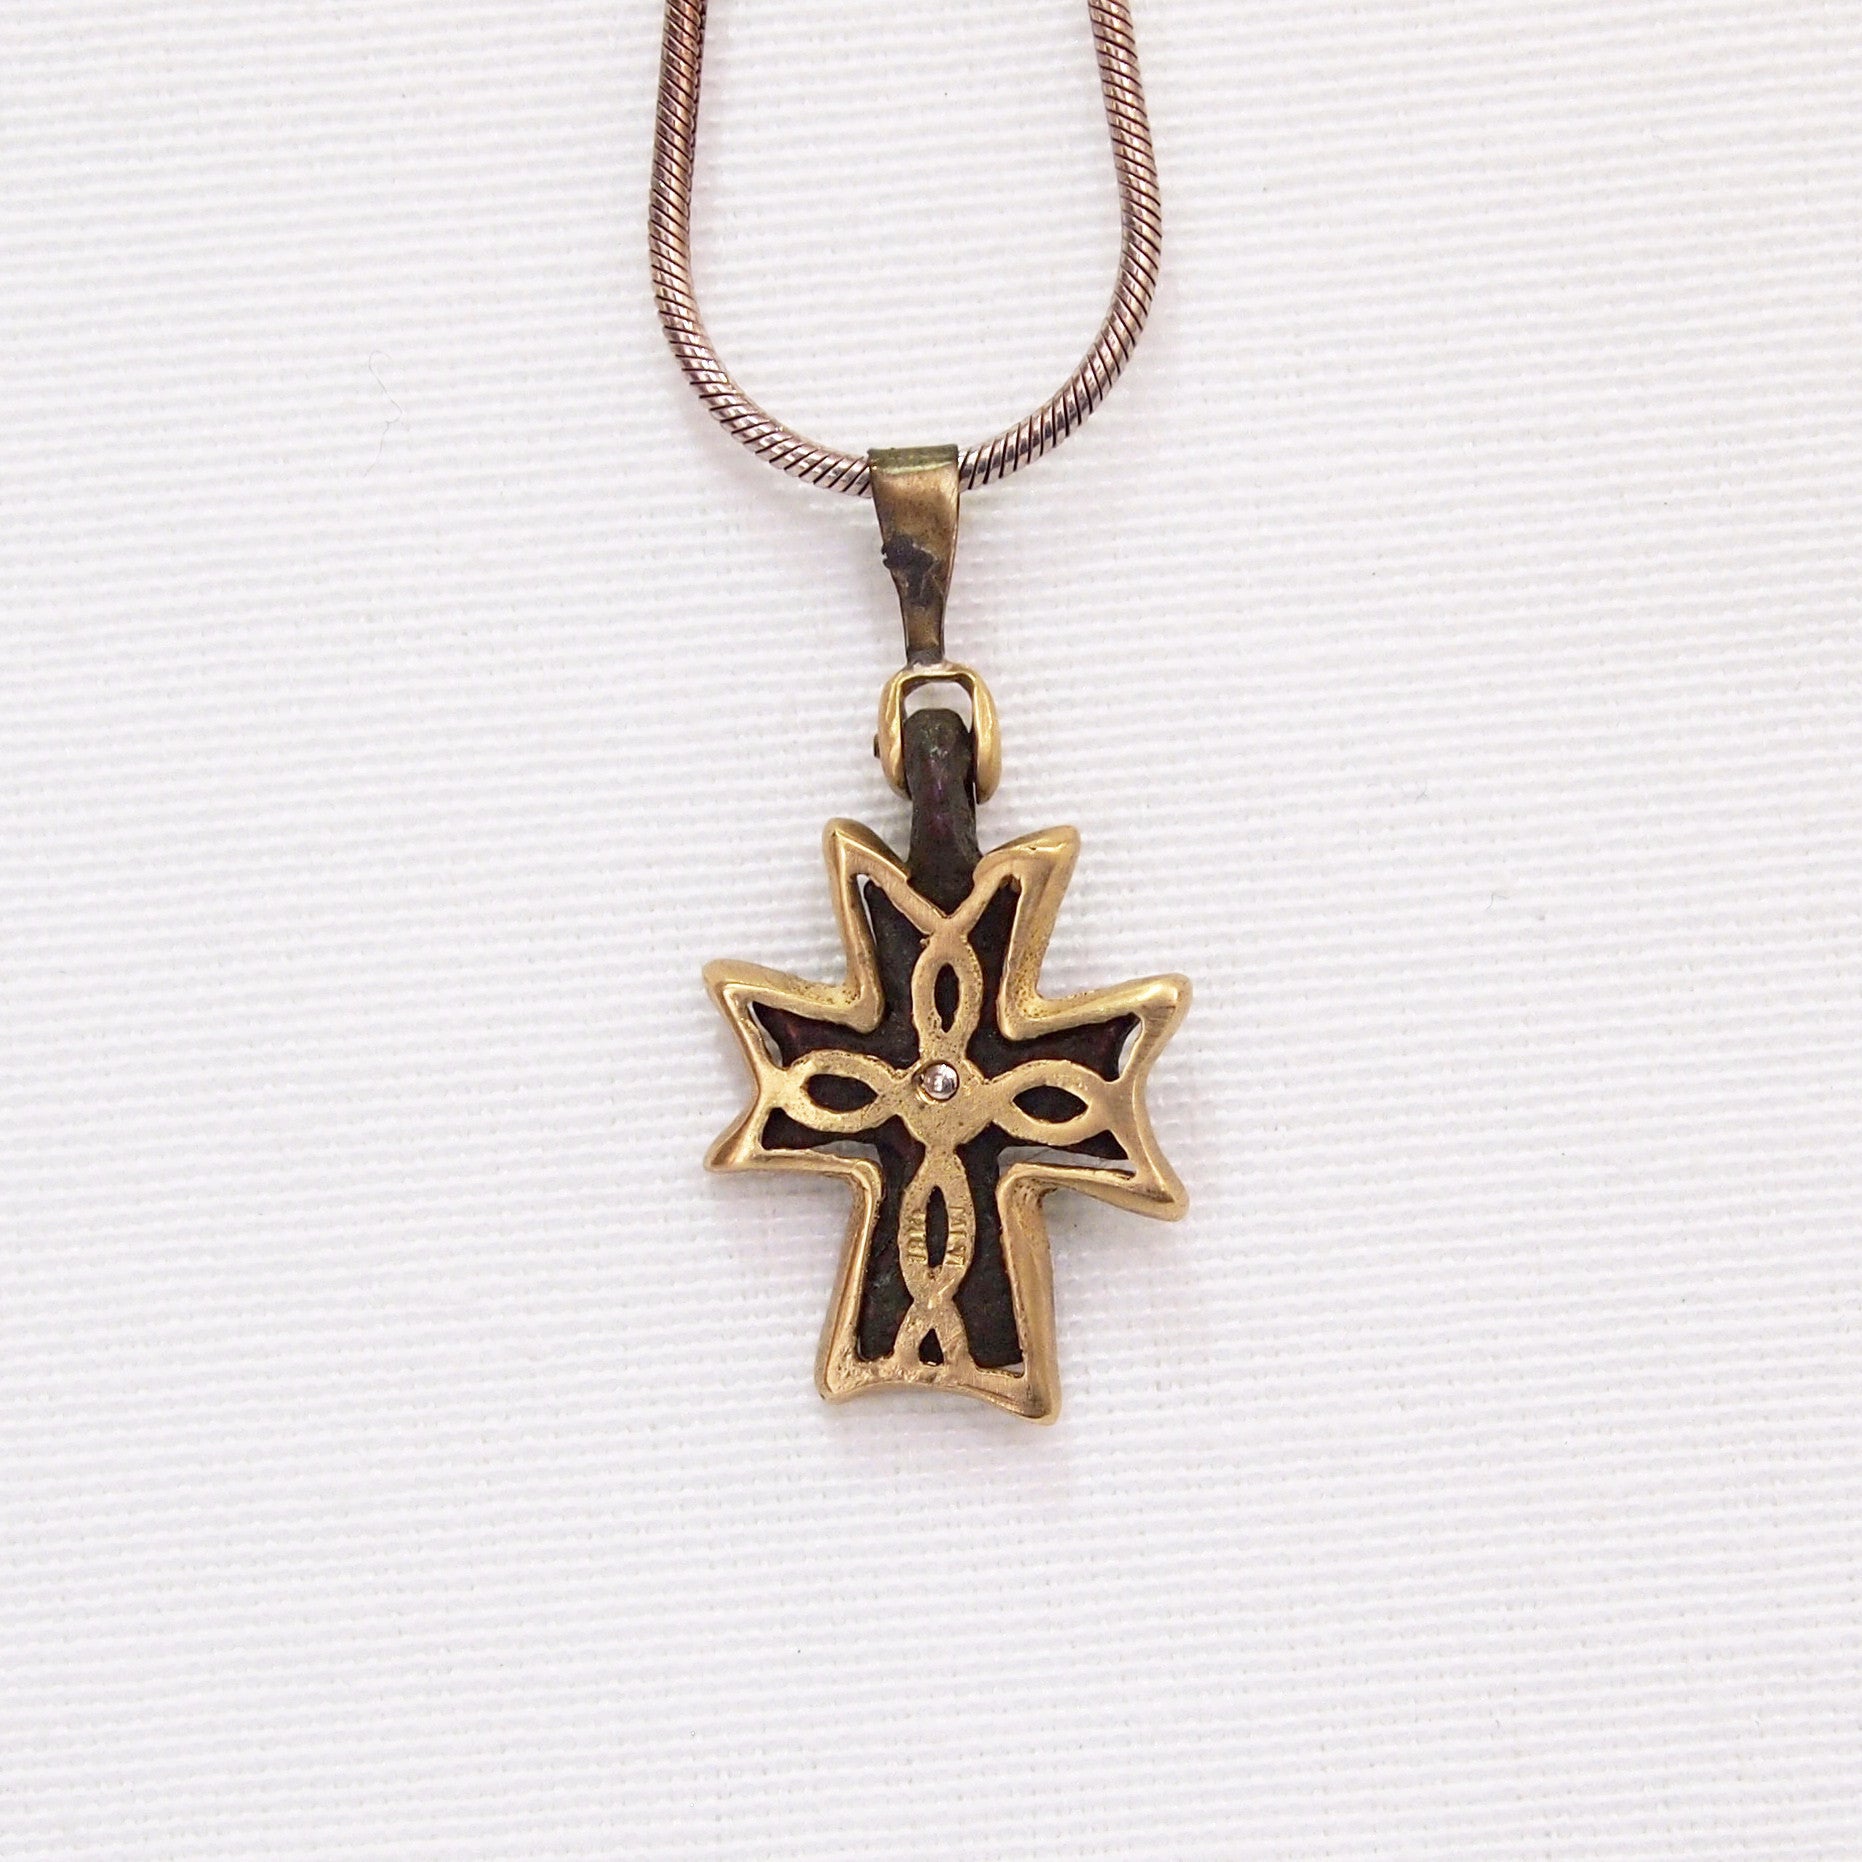 Byzantine Period Bronze Cross Pendant Encrusted In Yellow Gold